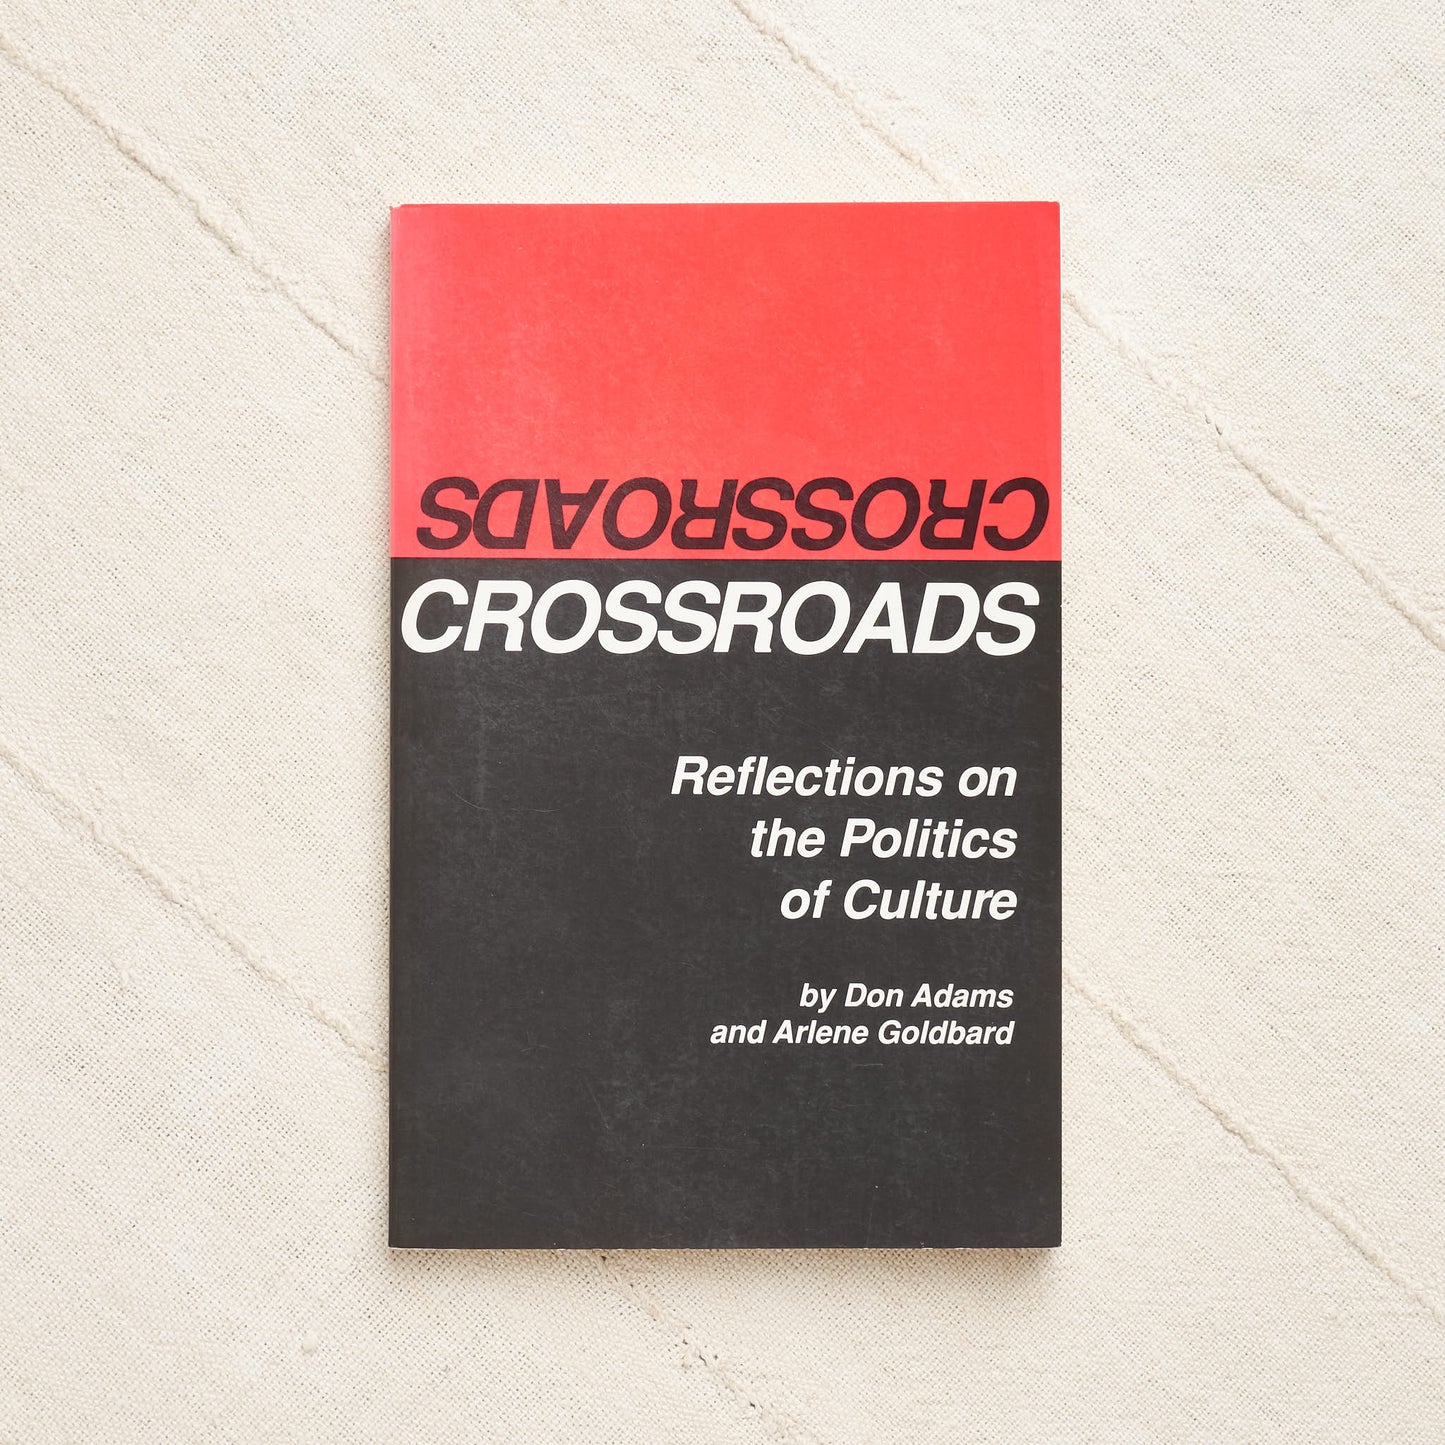 Crossroads: Reflections on the Politics of Culture